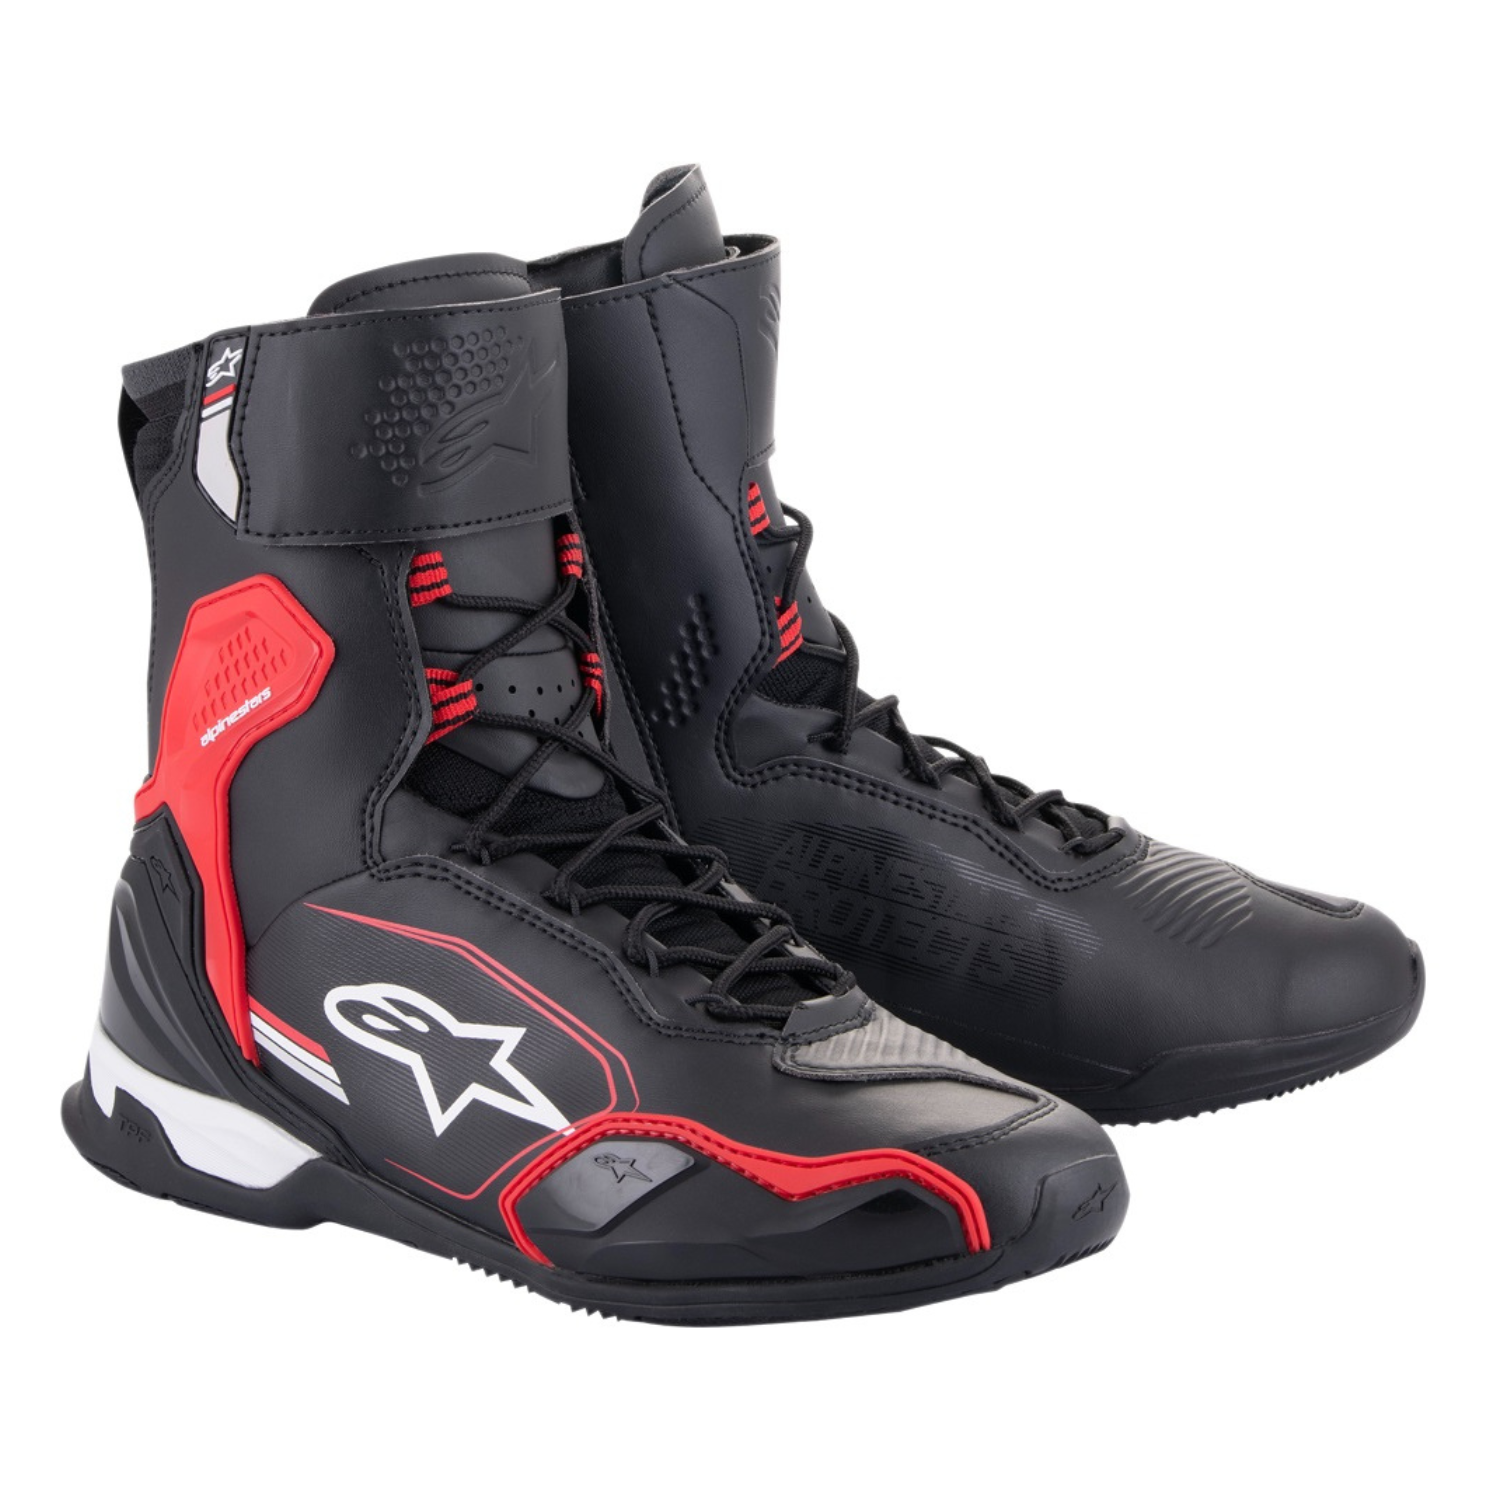 Image of Alpinestars Superfaster Shoes Black Bright Red White Talla US 105